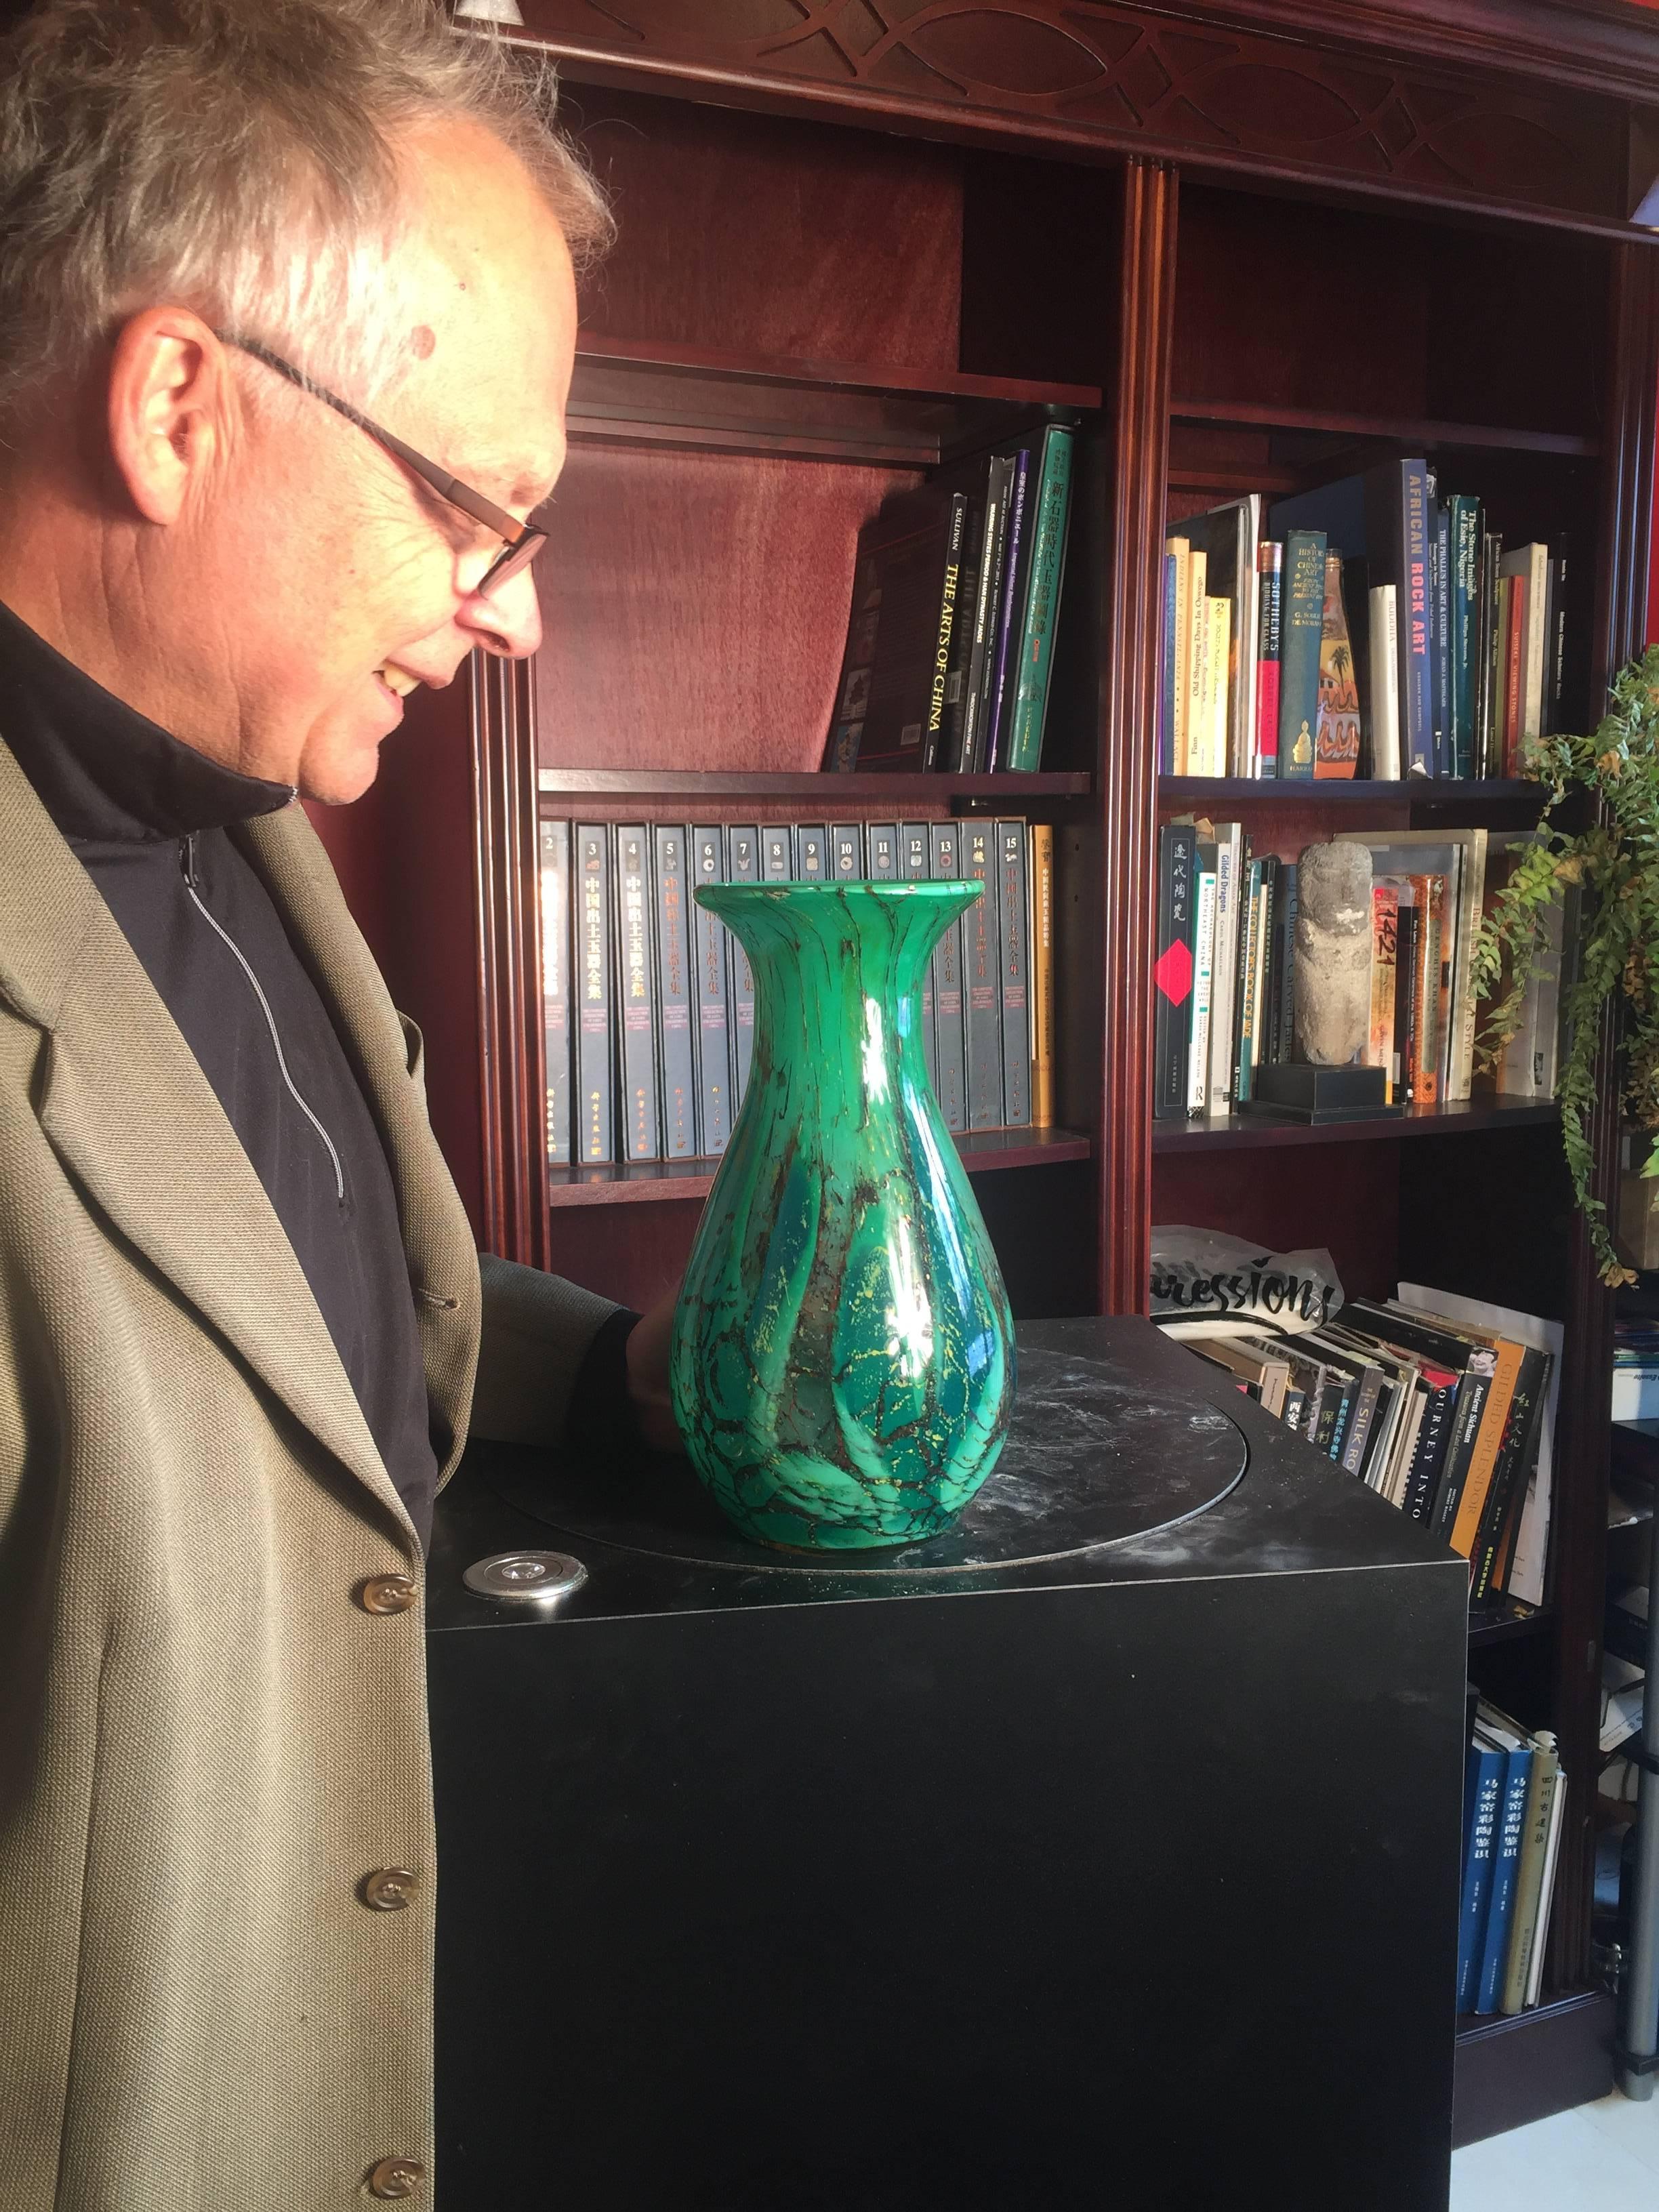 FEBRUARY SALE - NOW SAVE 25% AND MORE

A large and stunning hand crafted glass vase by WMF Ikora, superbly rendered in rich greens with yellow and red inclusions, Karl Wiedmann designer, circa 1935.

Dimensions: Tall 12 inches high and 6 inches